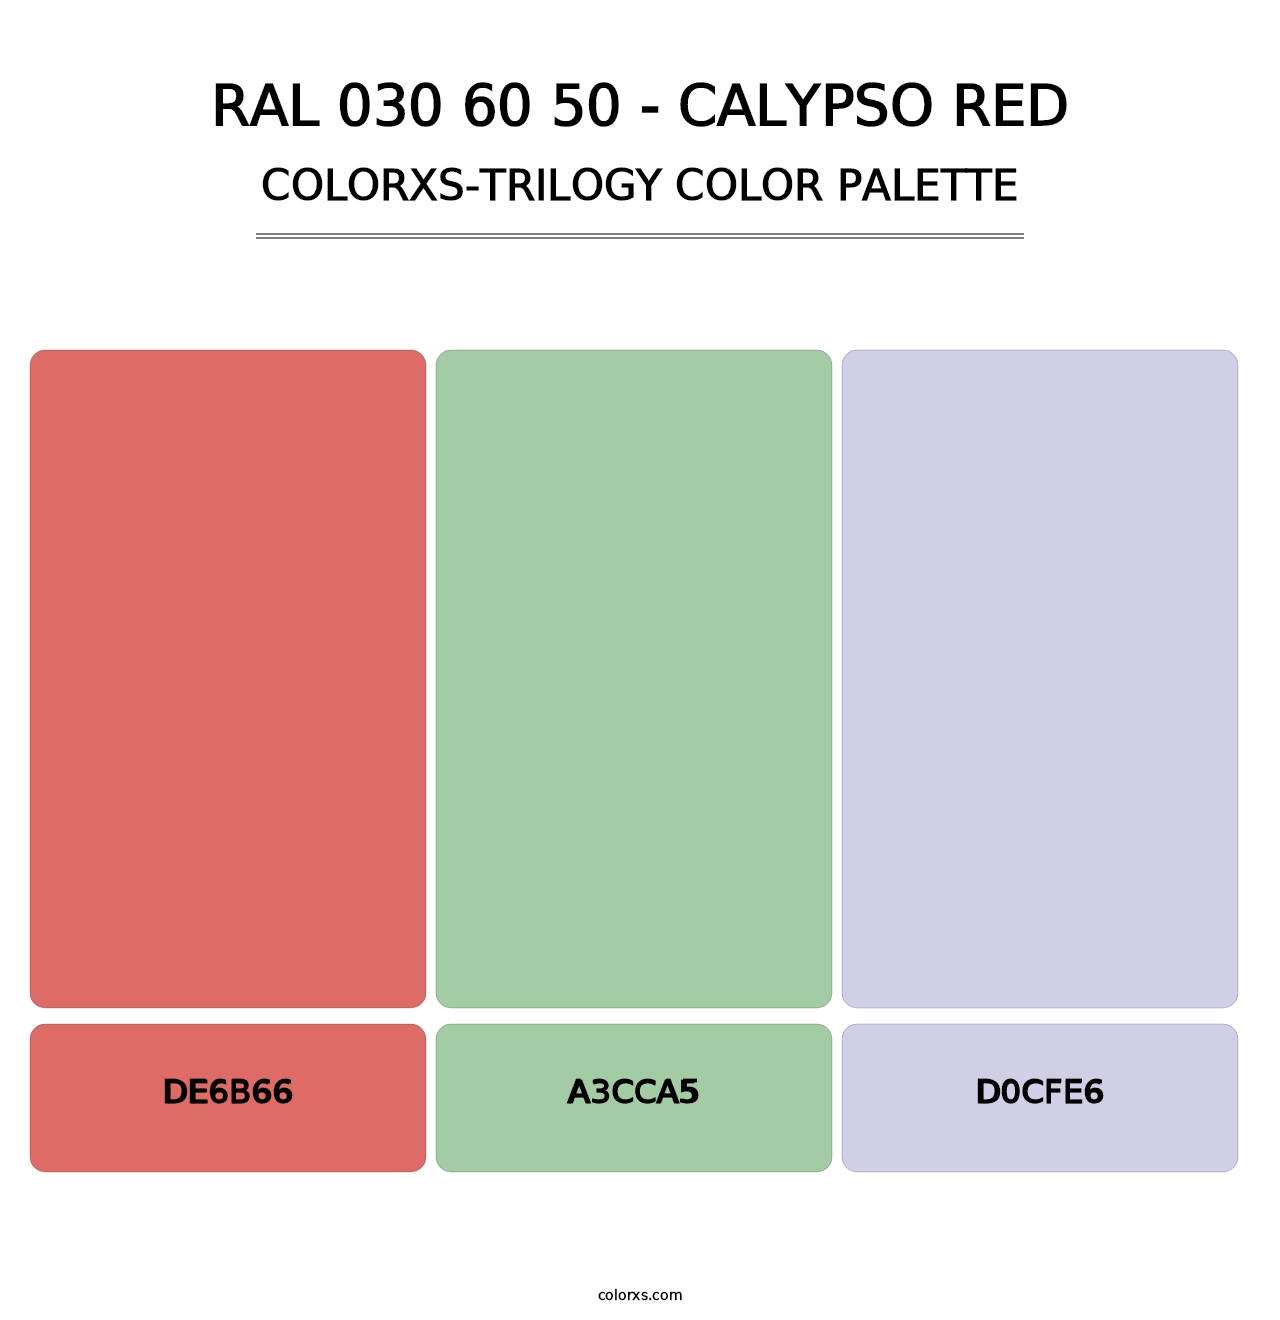 RAL 030 60 50 - Calypso Red - Colorxs Trilogy Palette